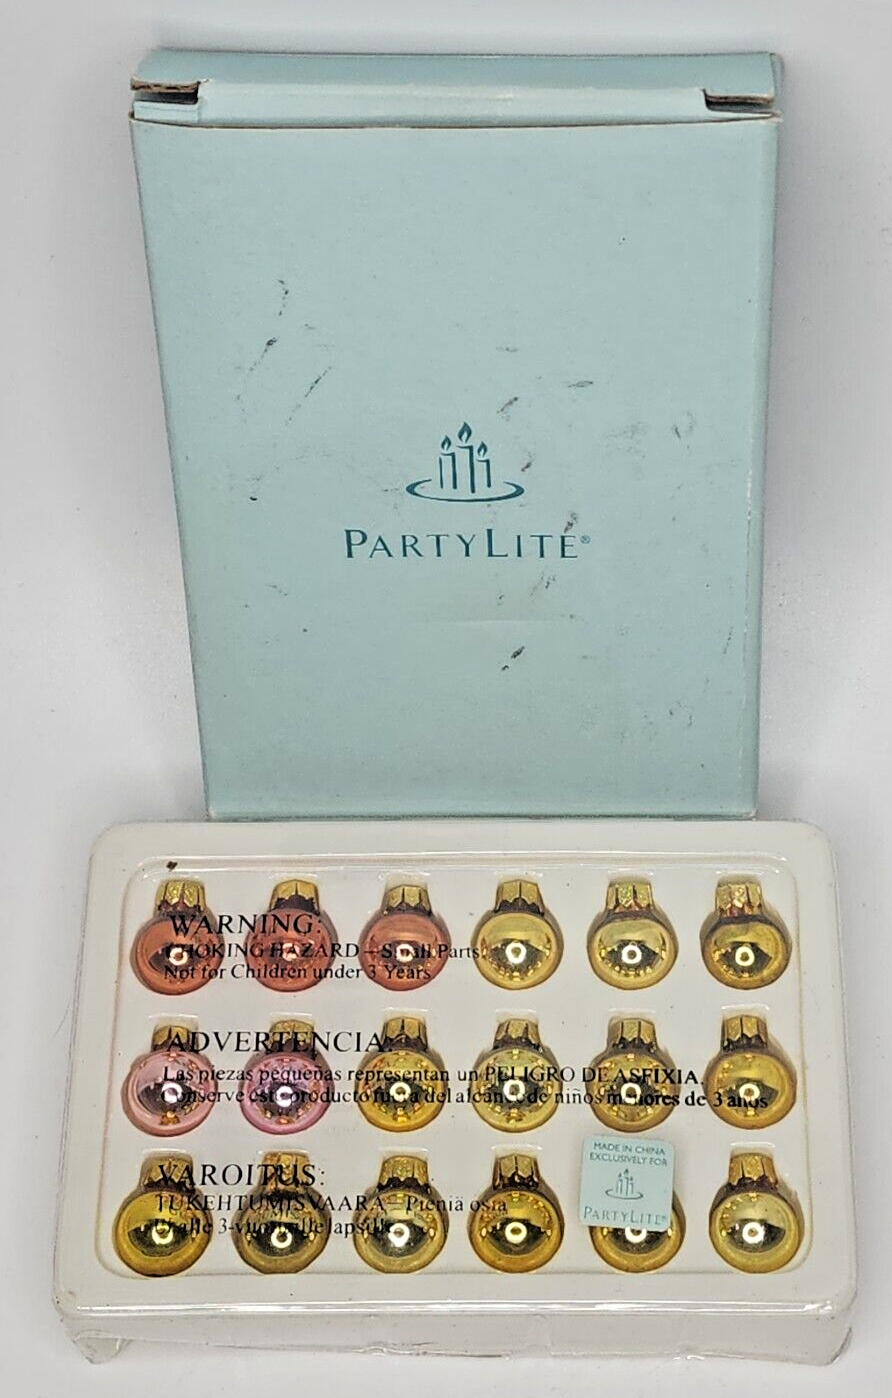 Partylite Glowing Tree Ornament Set Extremely Rare Retired NIB P2A/P7855 Gold - $249.99